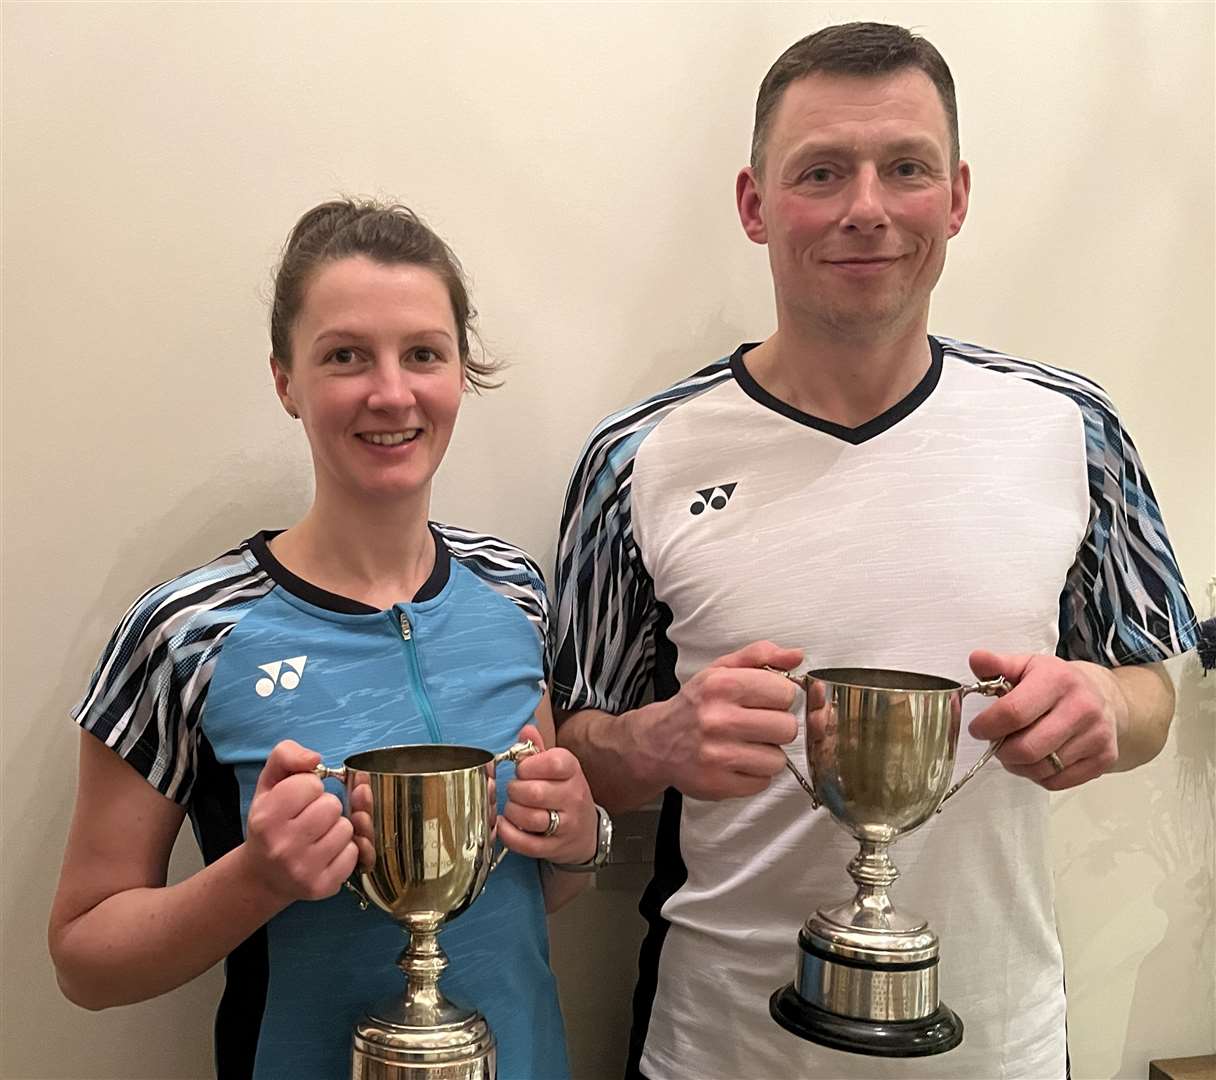 Shona and Mark Mackay had a thrilling victory in their mixed doubles final in Glasgow.